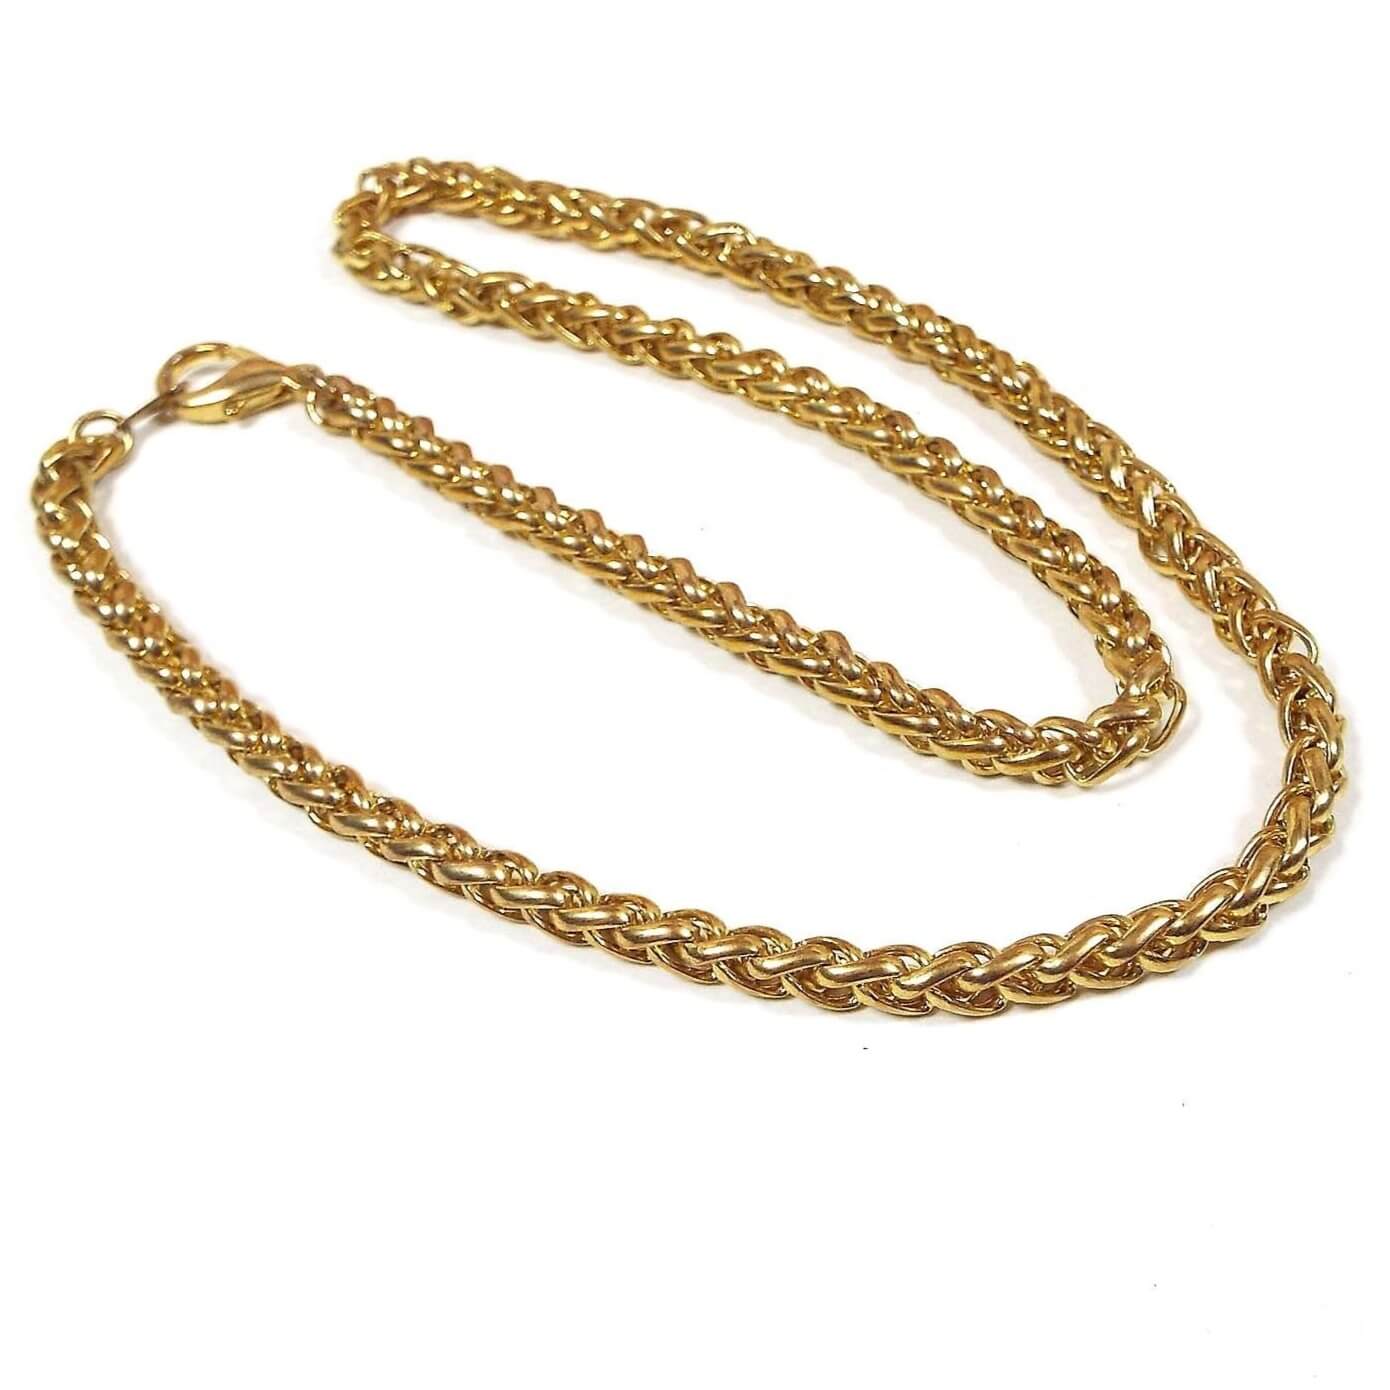 Top view of the 1990's retro vintage chain necklace. The metal is gold tone in color. It has a wider wheat chain design with a lobster claw clasp on the end.